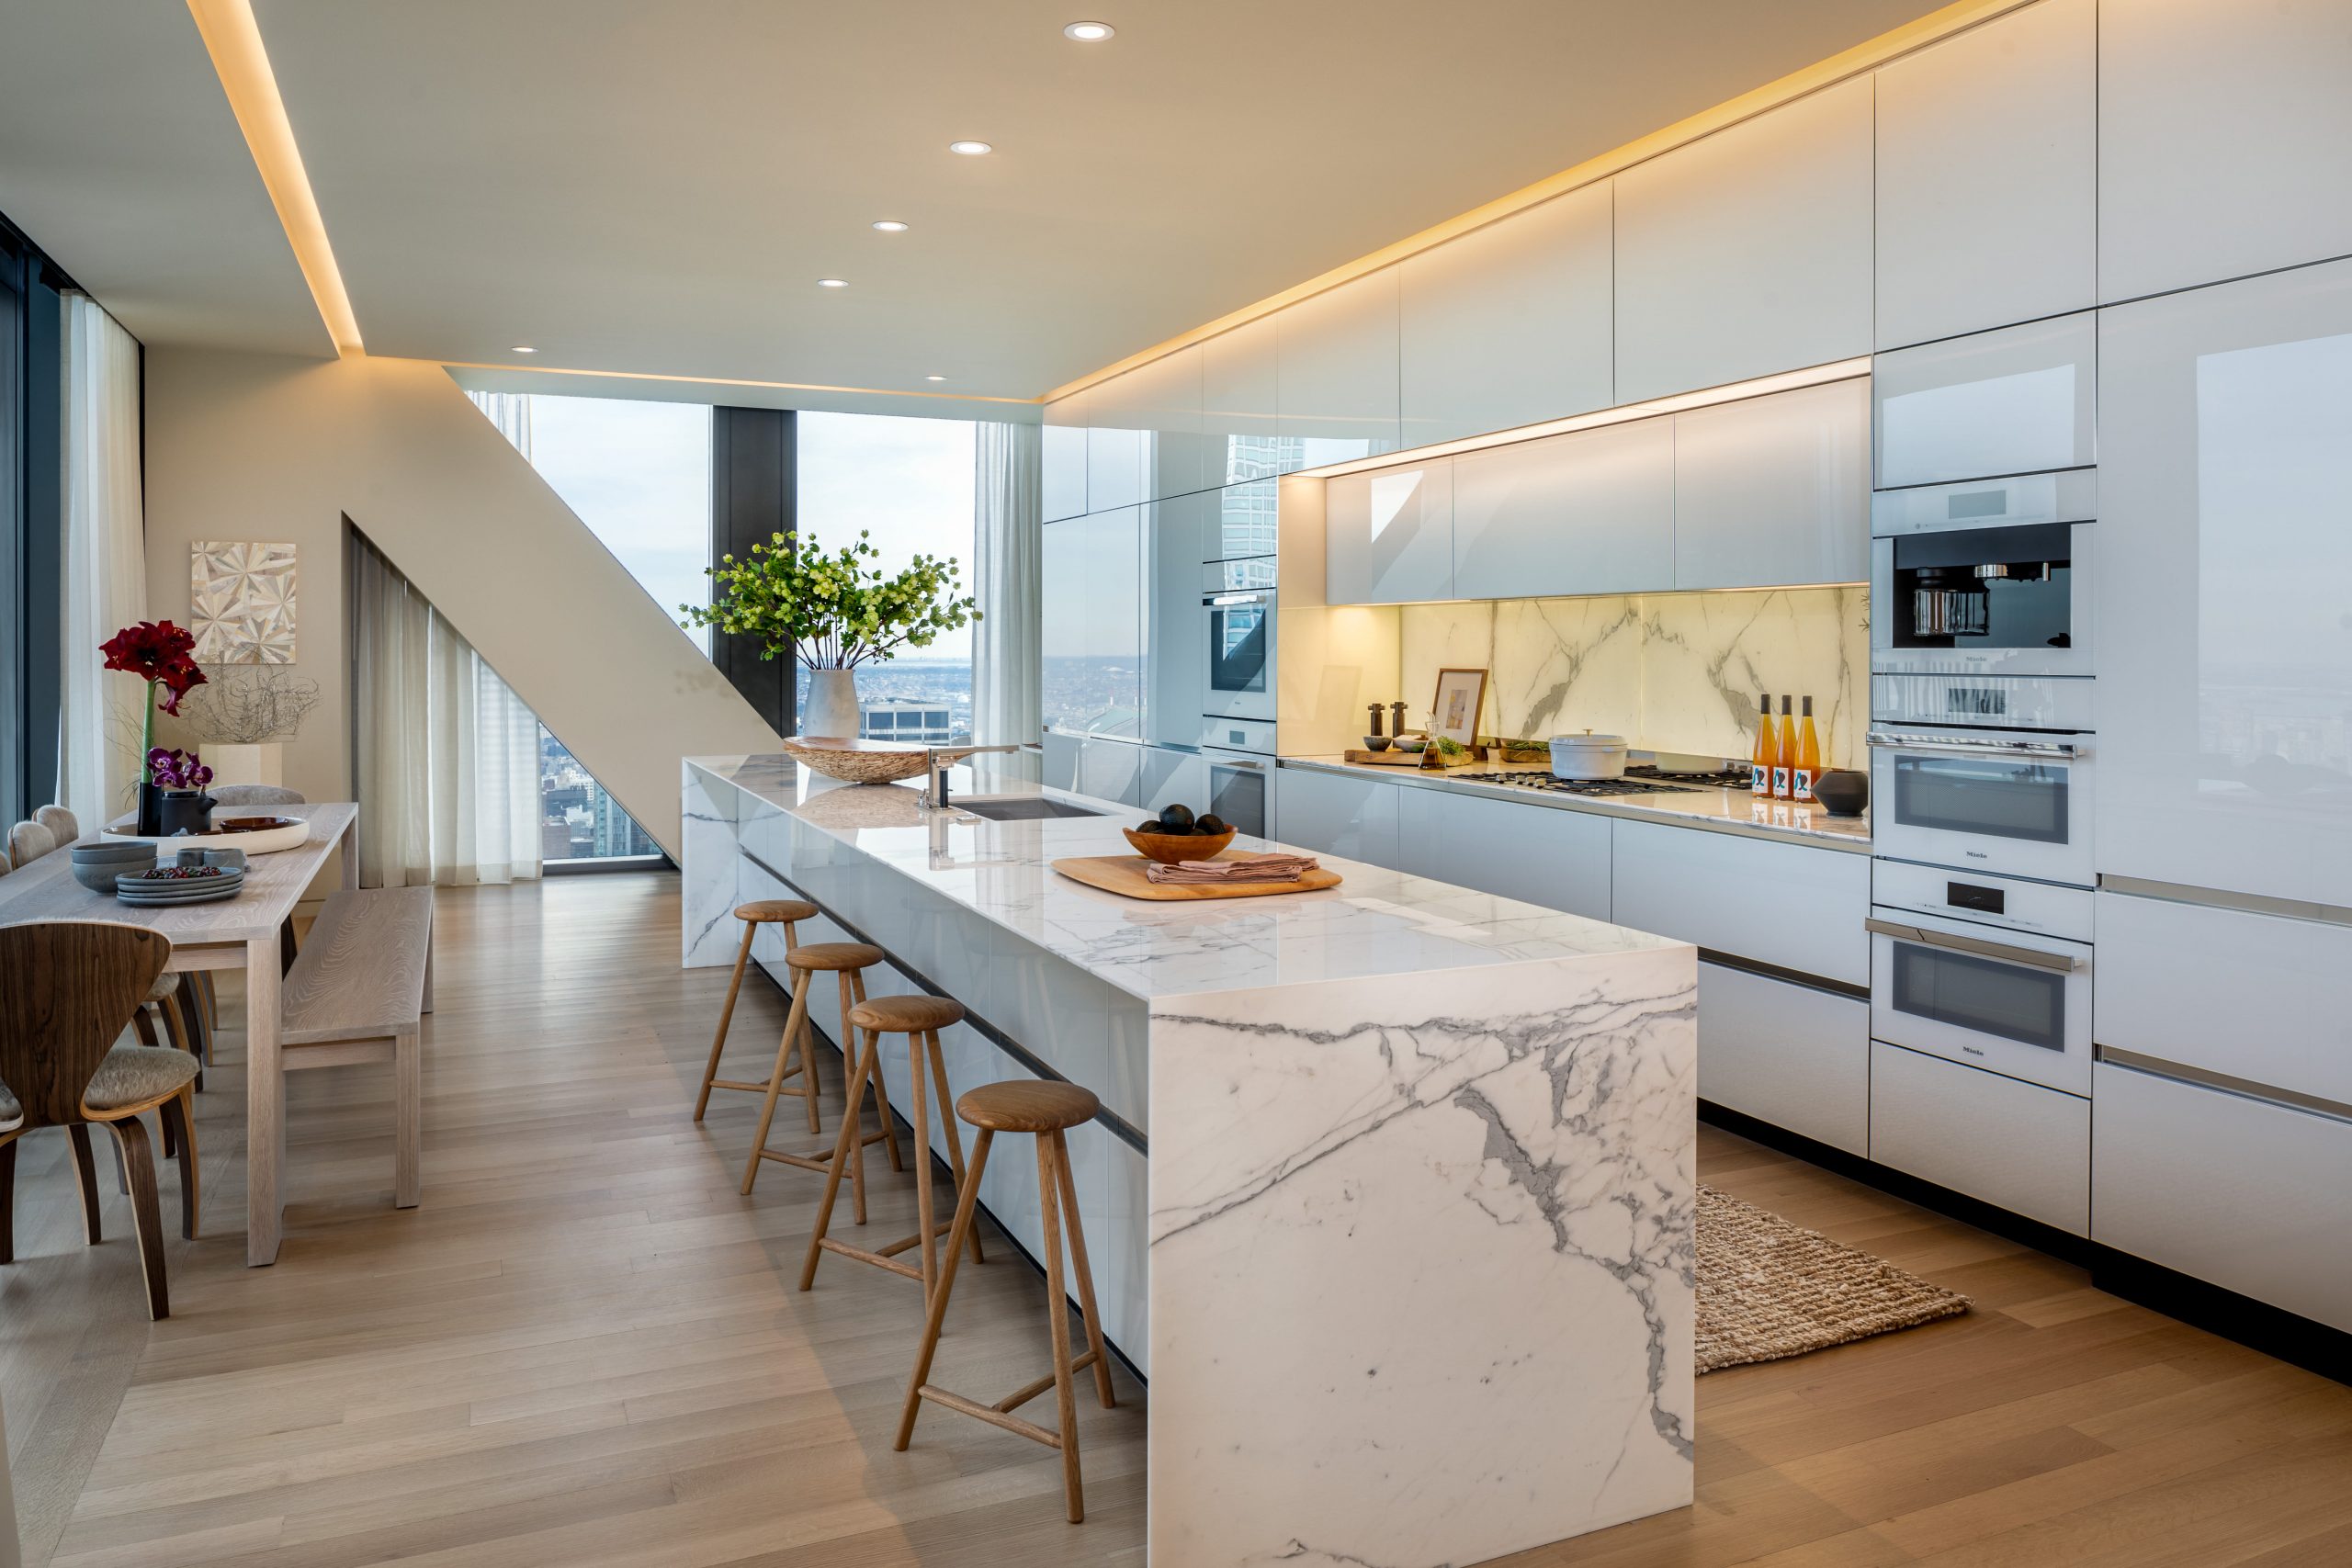 53 WEST 53 BRANDED RESIDENCES: WHERE ARCHITECTURAL MASTERY MEETS MANHATTAN LUXURY